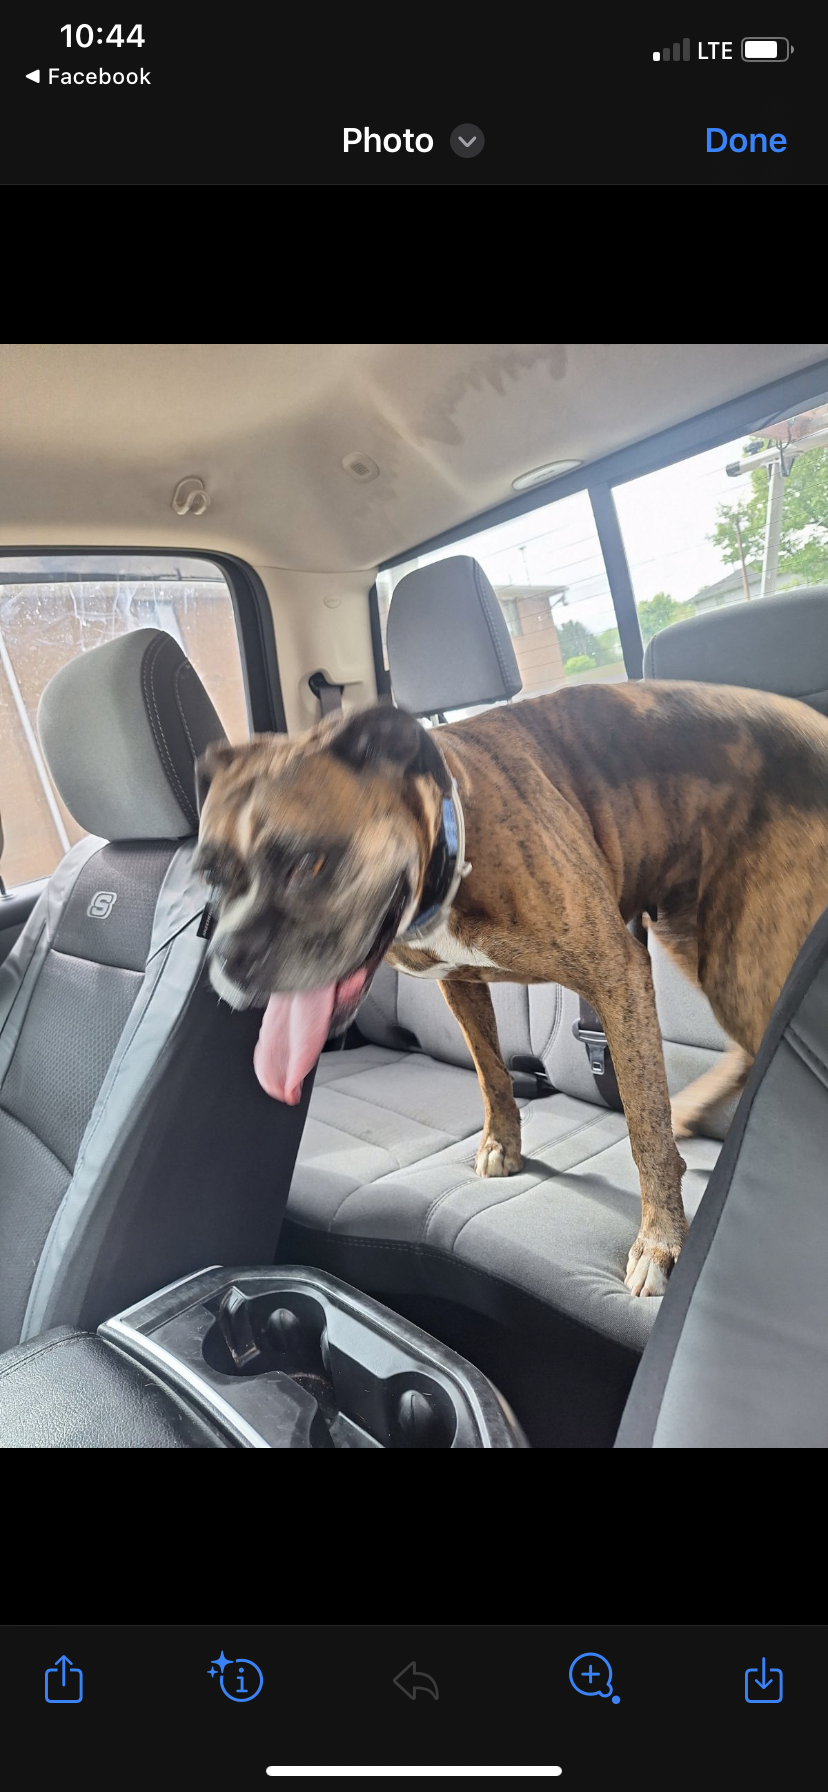 Image of N/a  brindle boxer, Found Dog